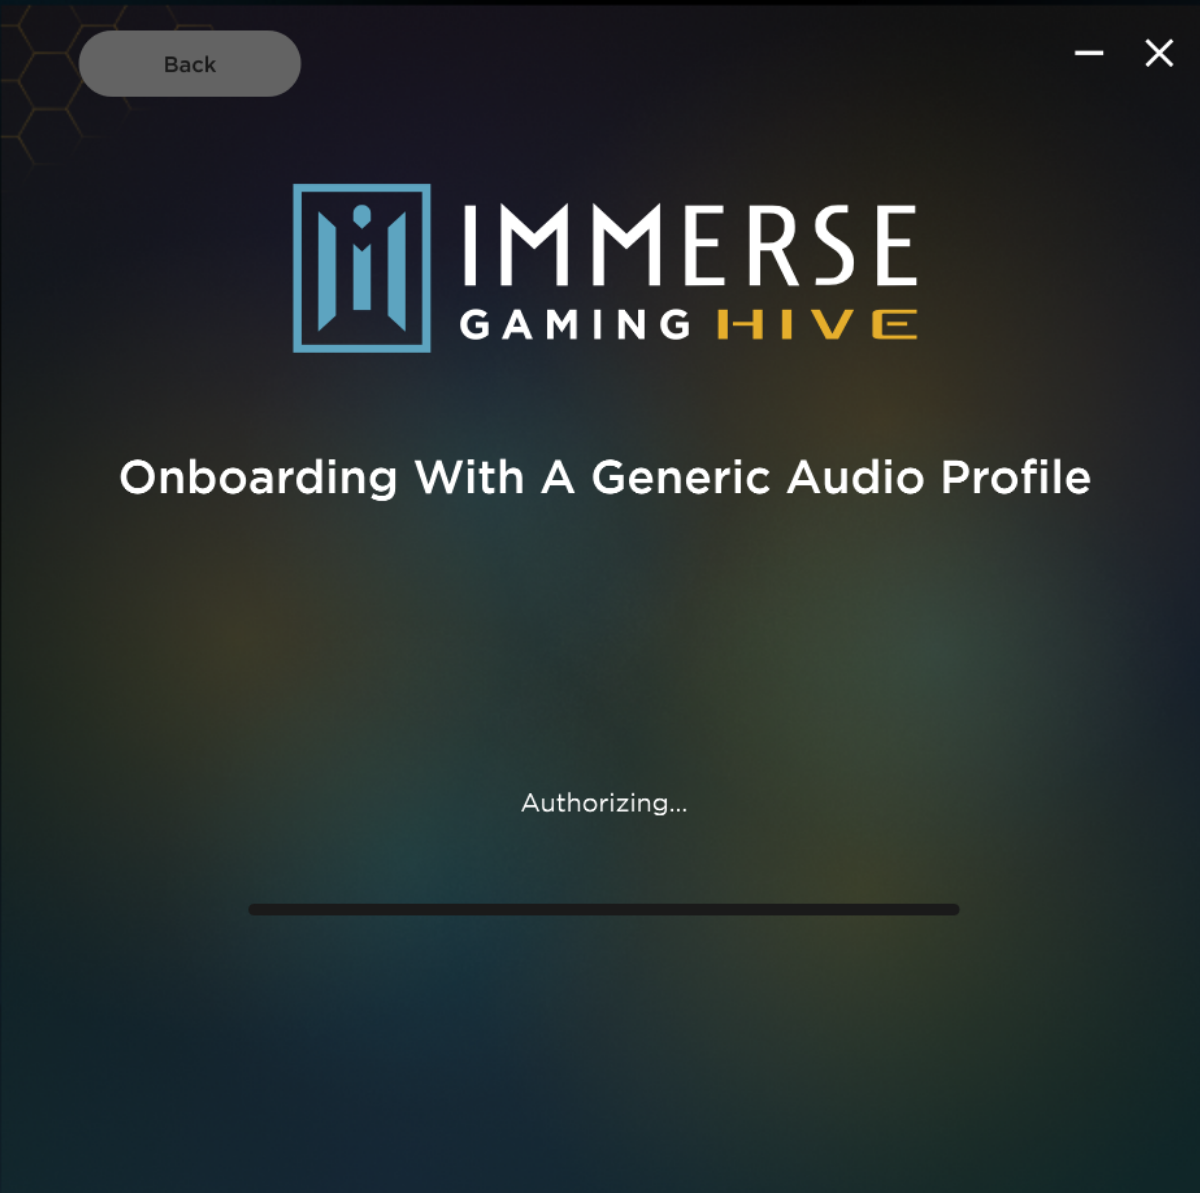 Immerse_Gaming_Hive_onboarding_page.png